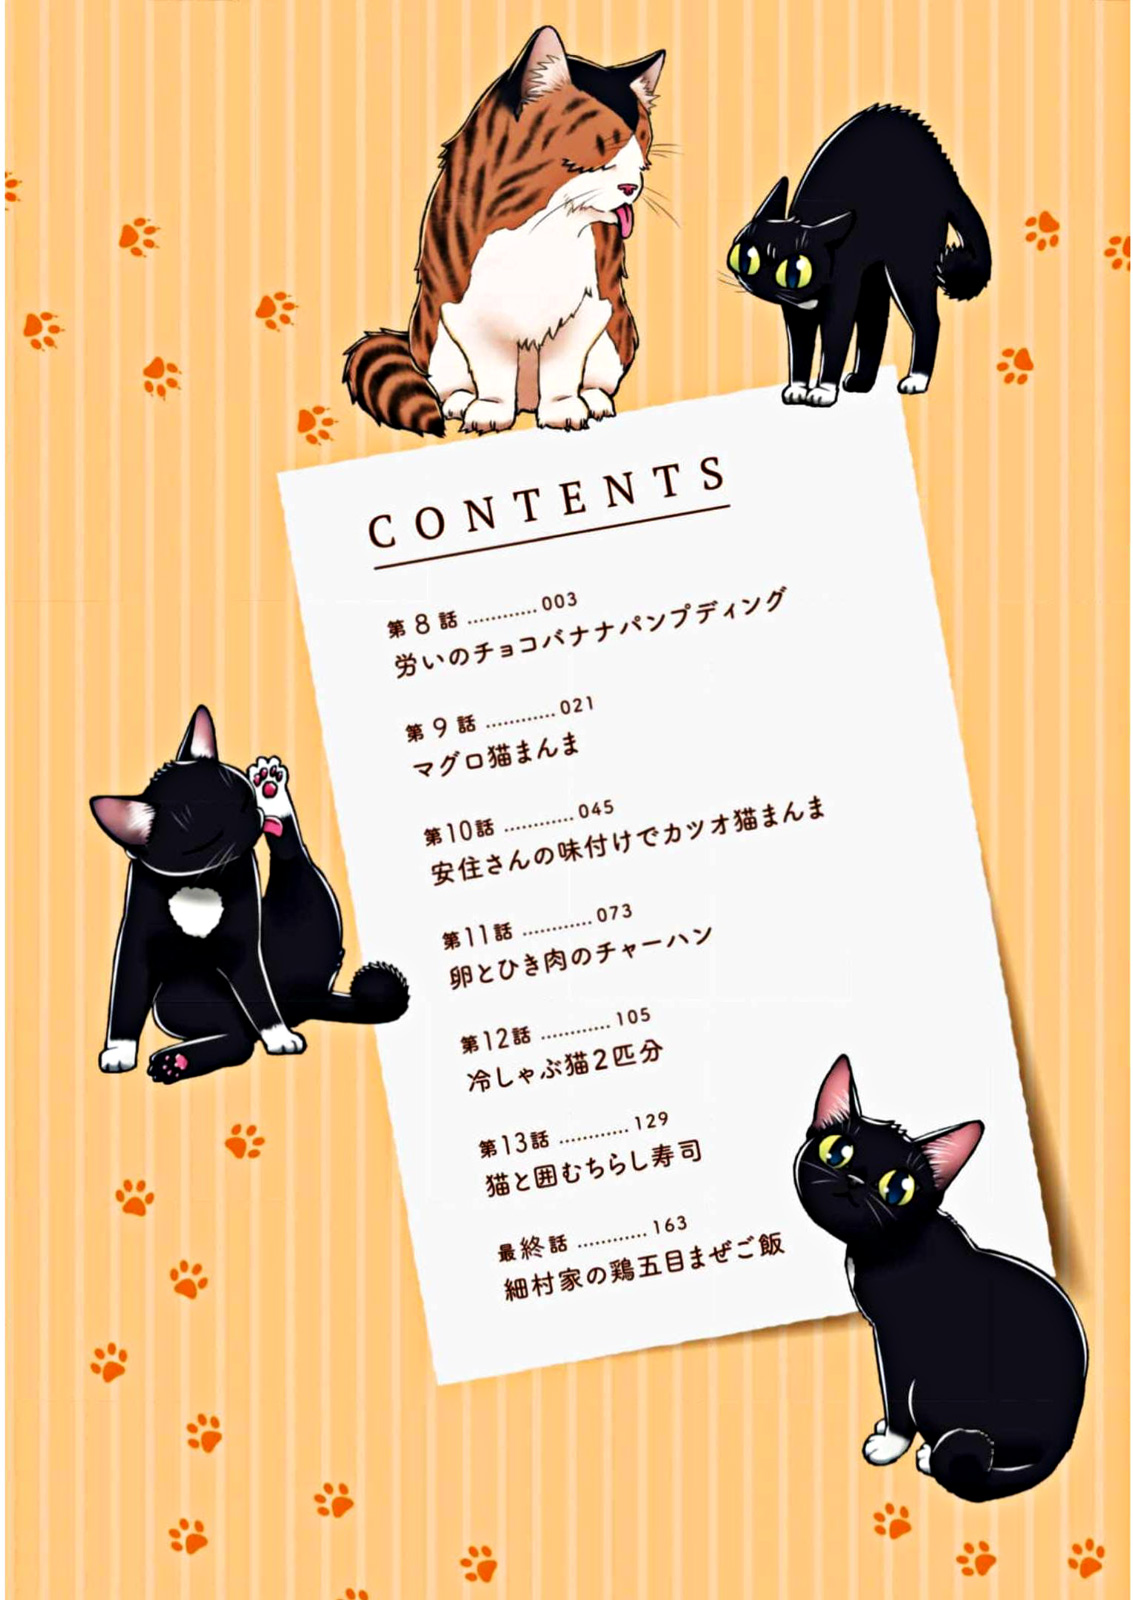 Hosomura-San With Cat's Snack - Page 3